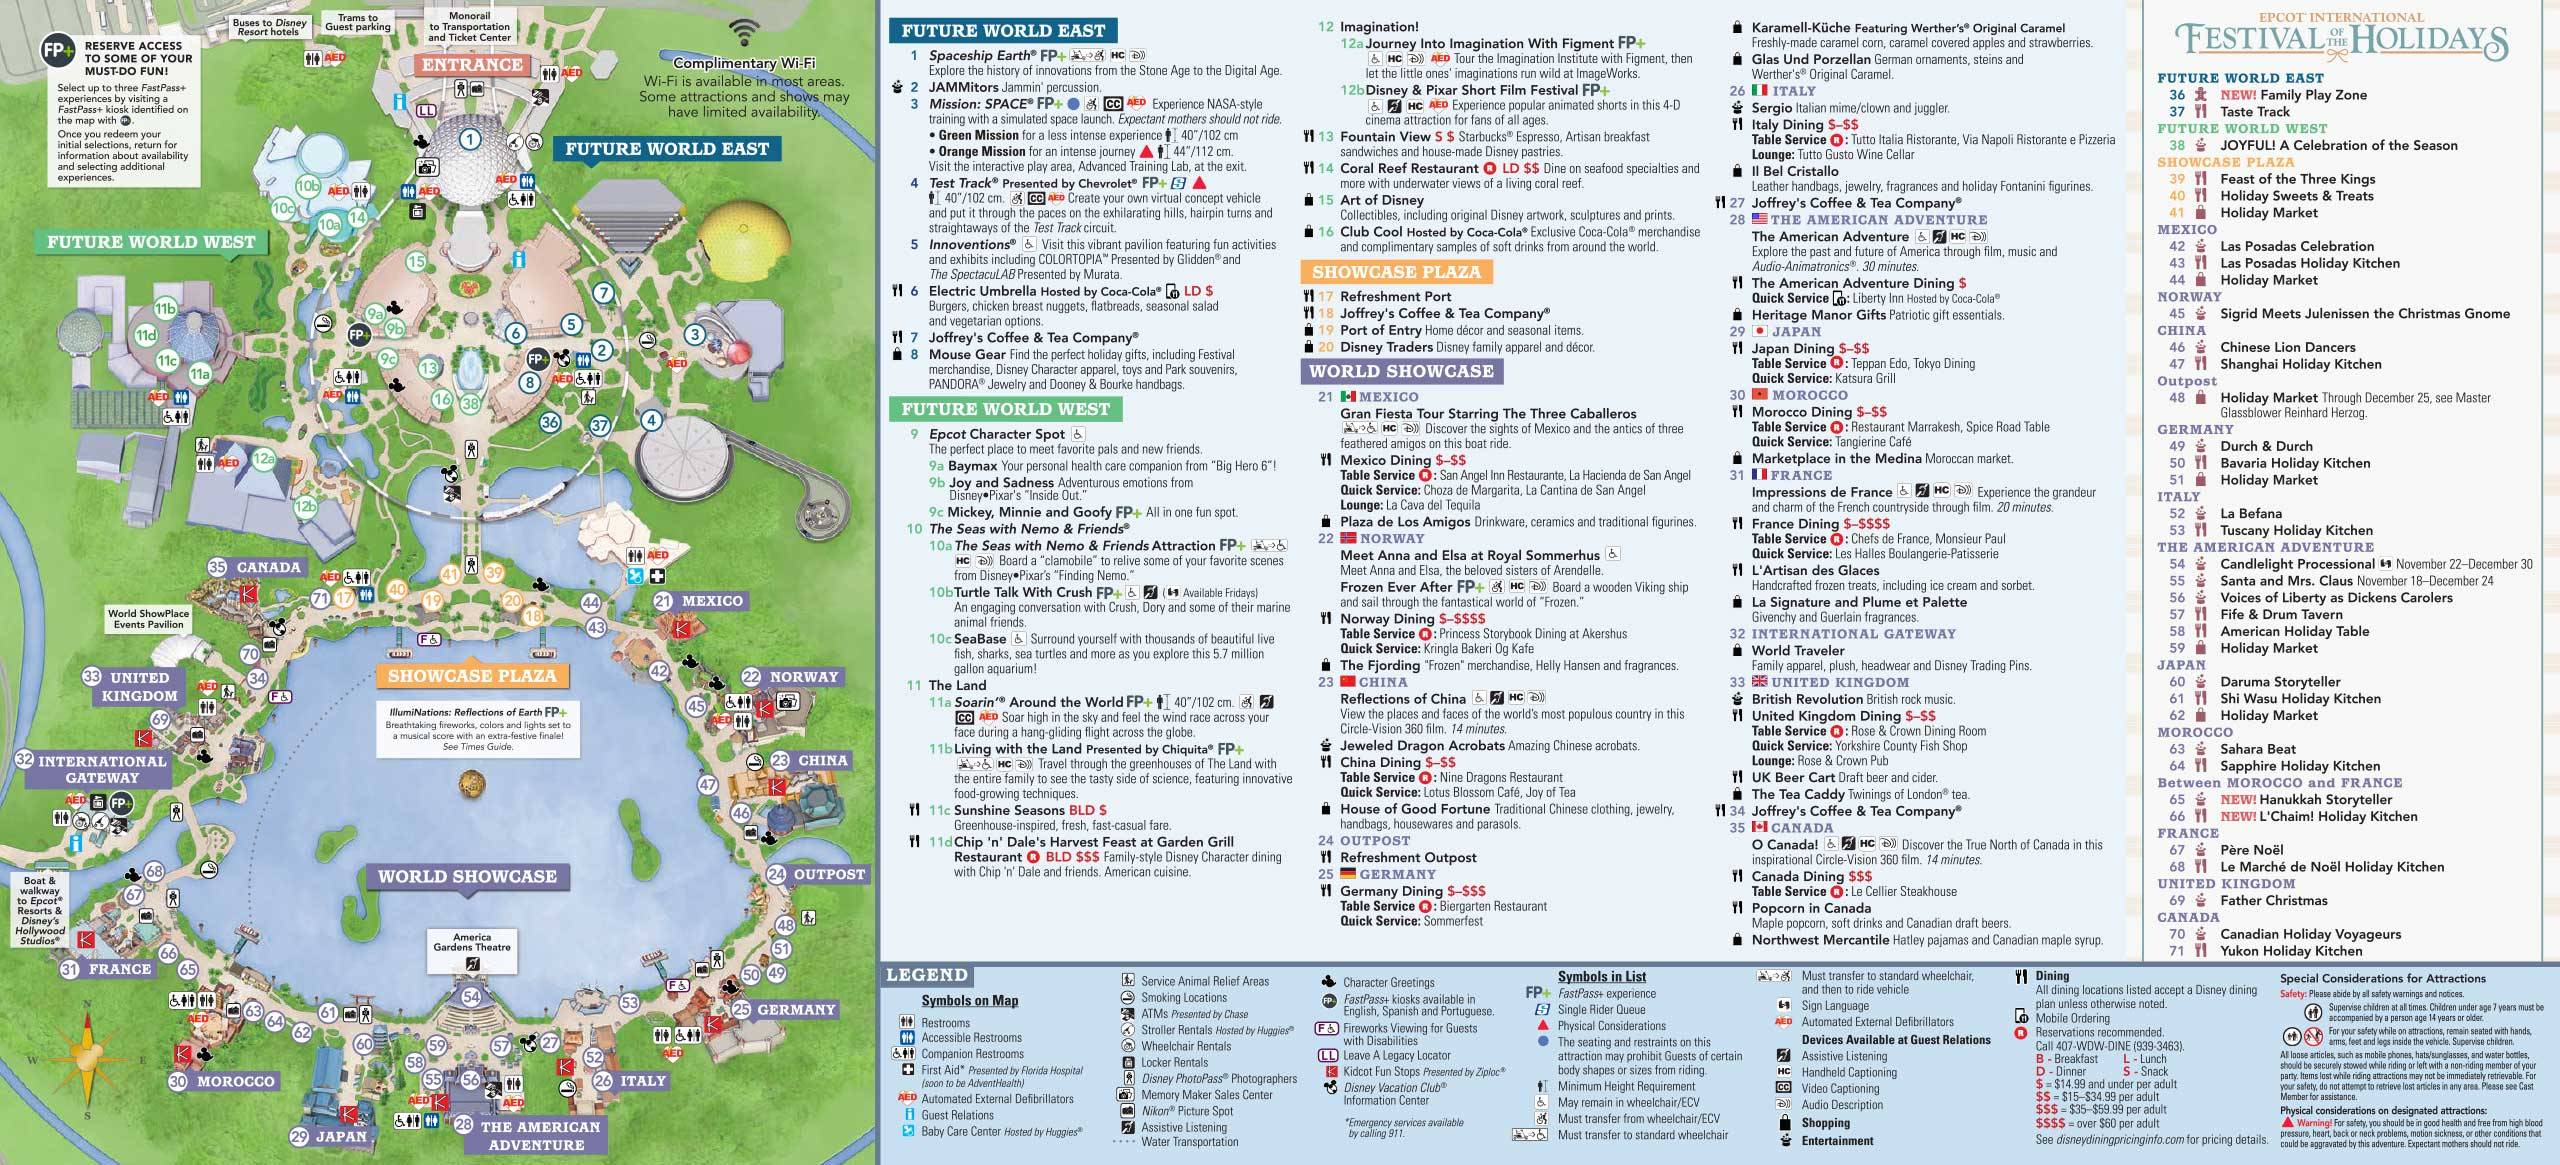 PHOTOS - Epcot 2018 Festival of the Holidays times guide and guide map